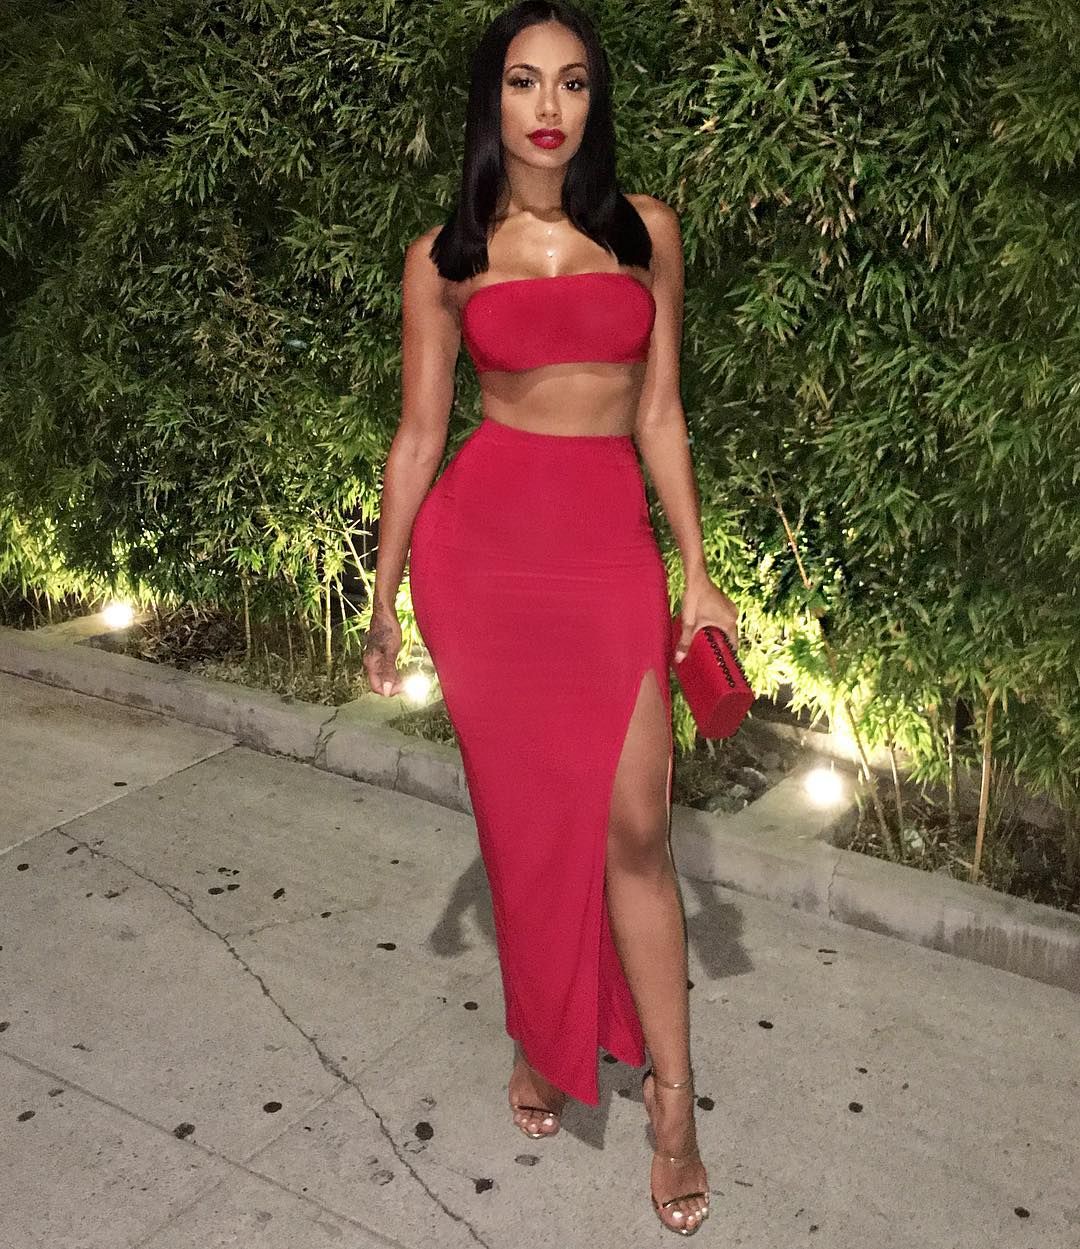 Erica Mena Drops A Surprise For Fan - Check Out Today's Event